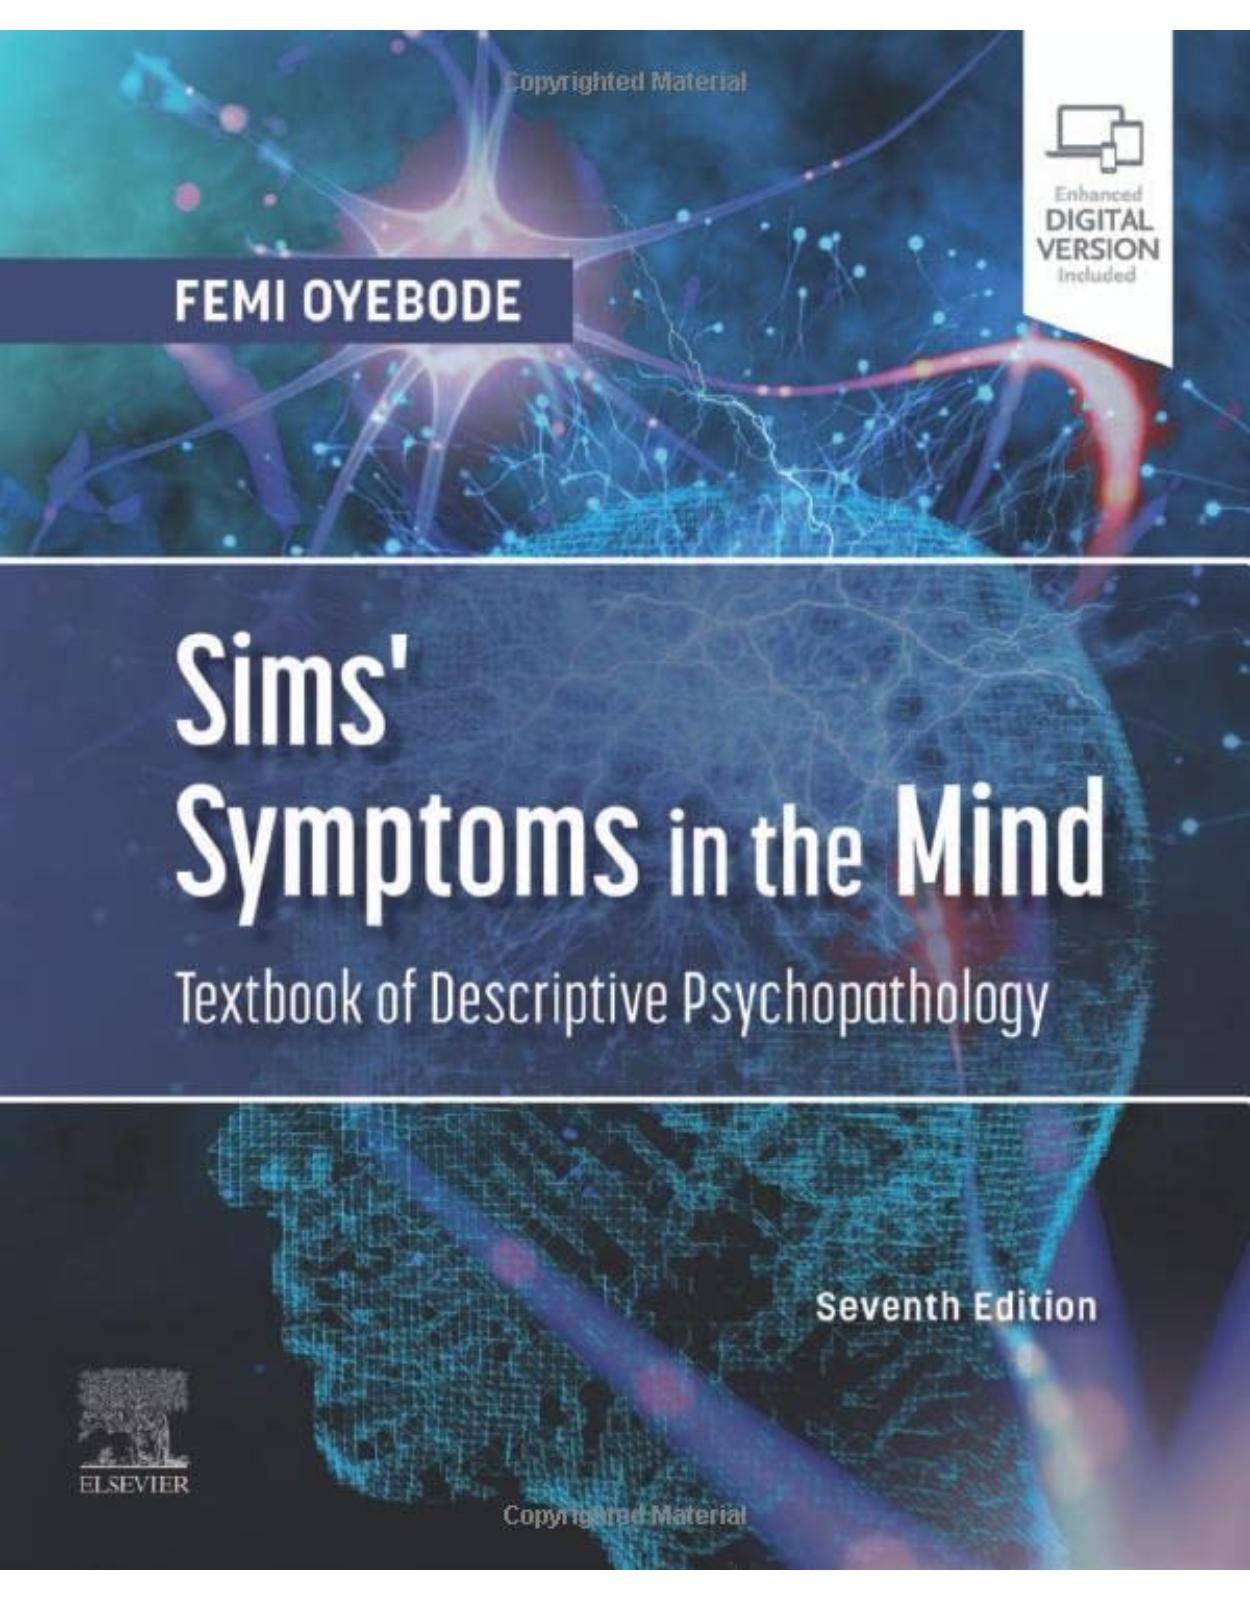 Sims’ Symptoms in the Mind